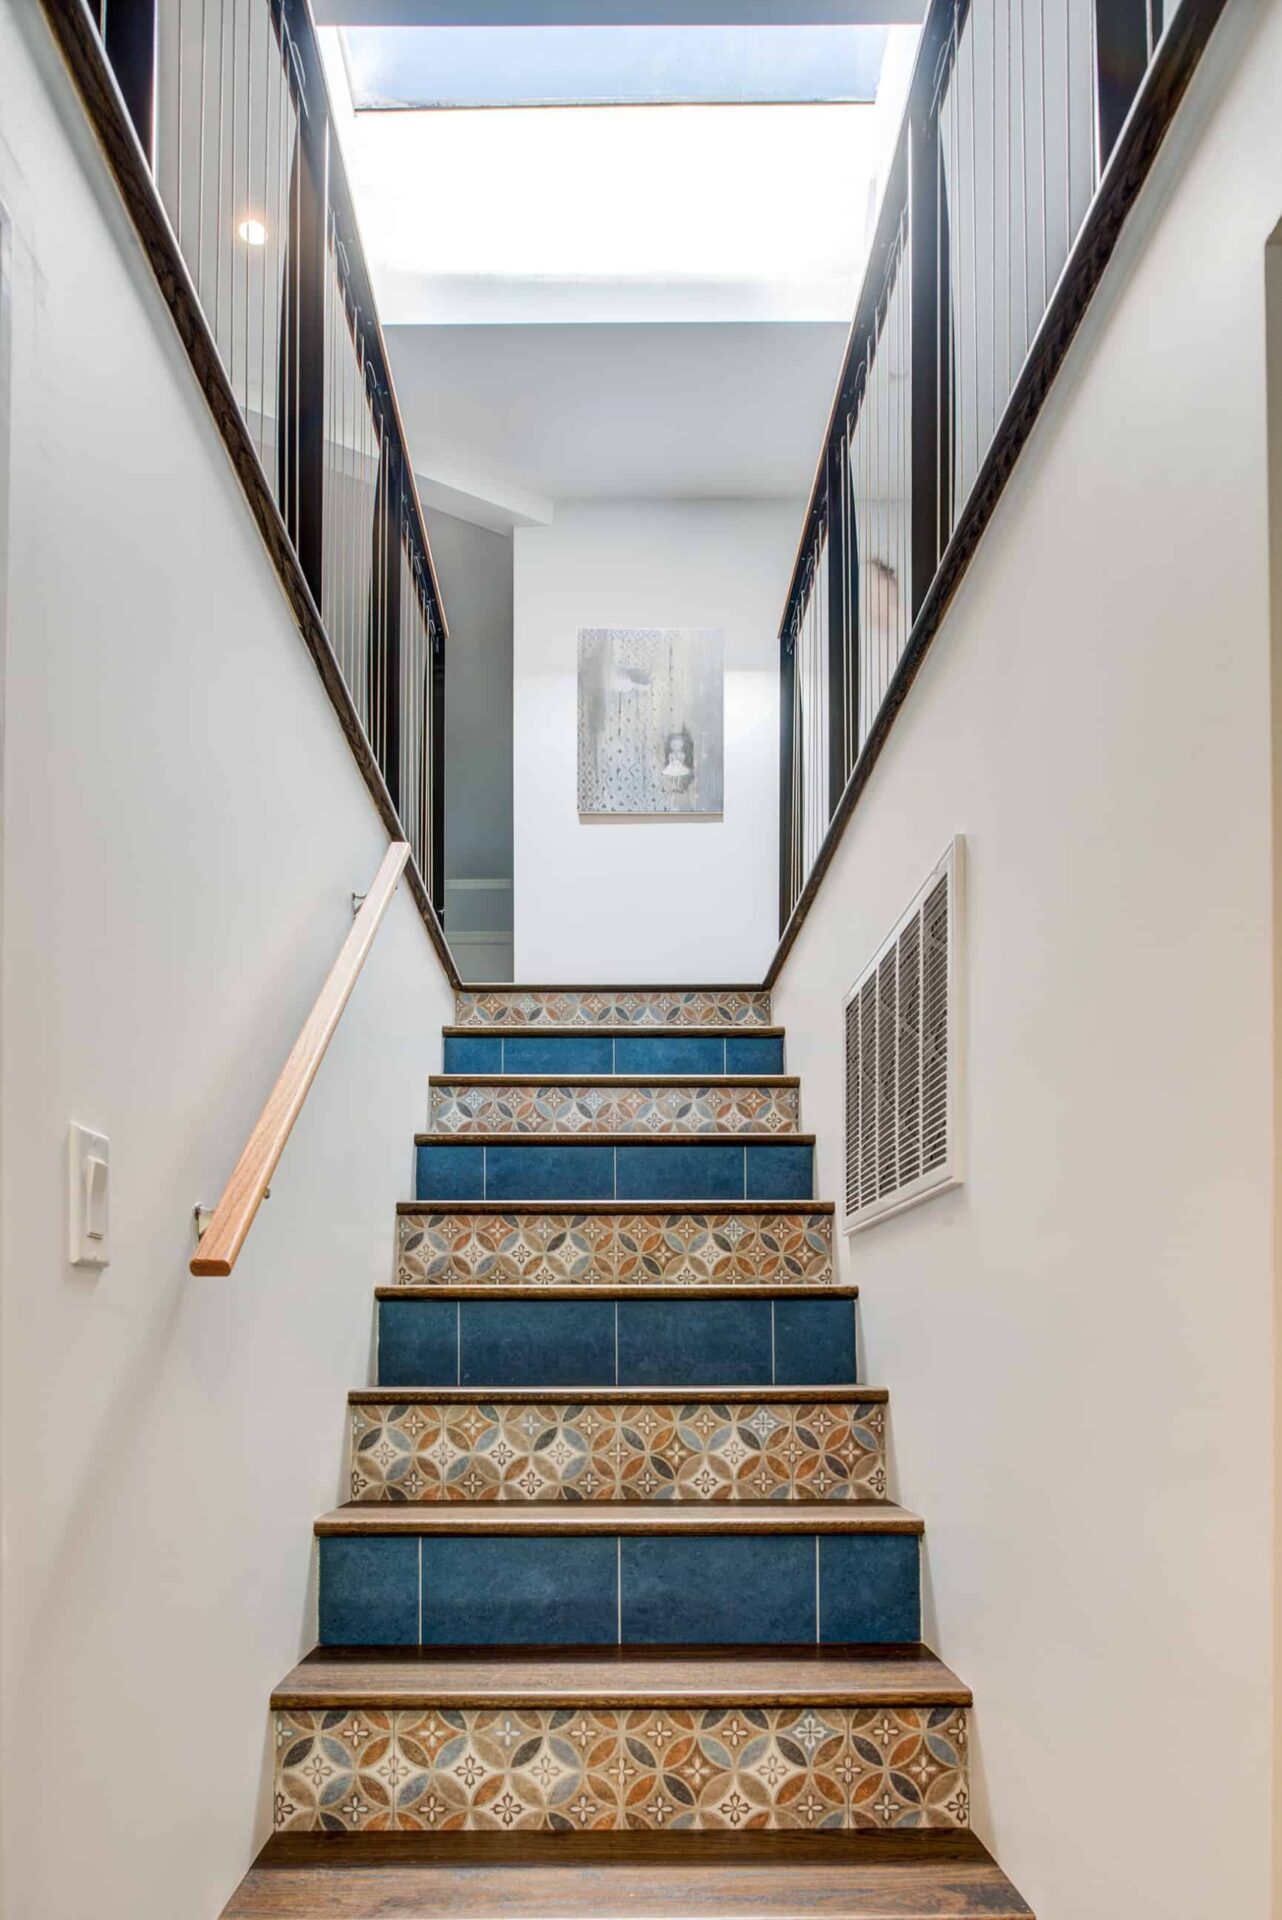 View of home staircase with unique tiling.